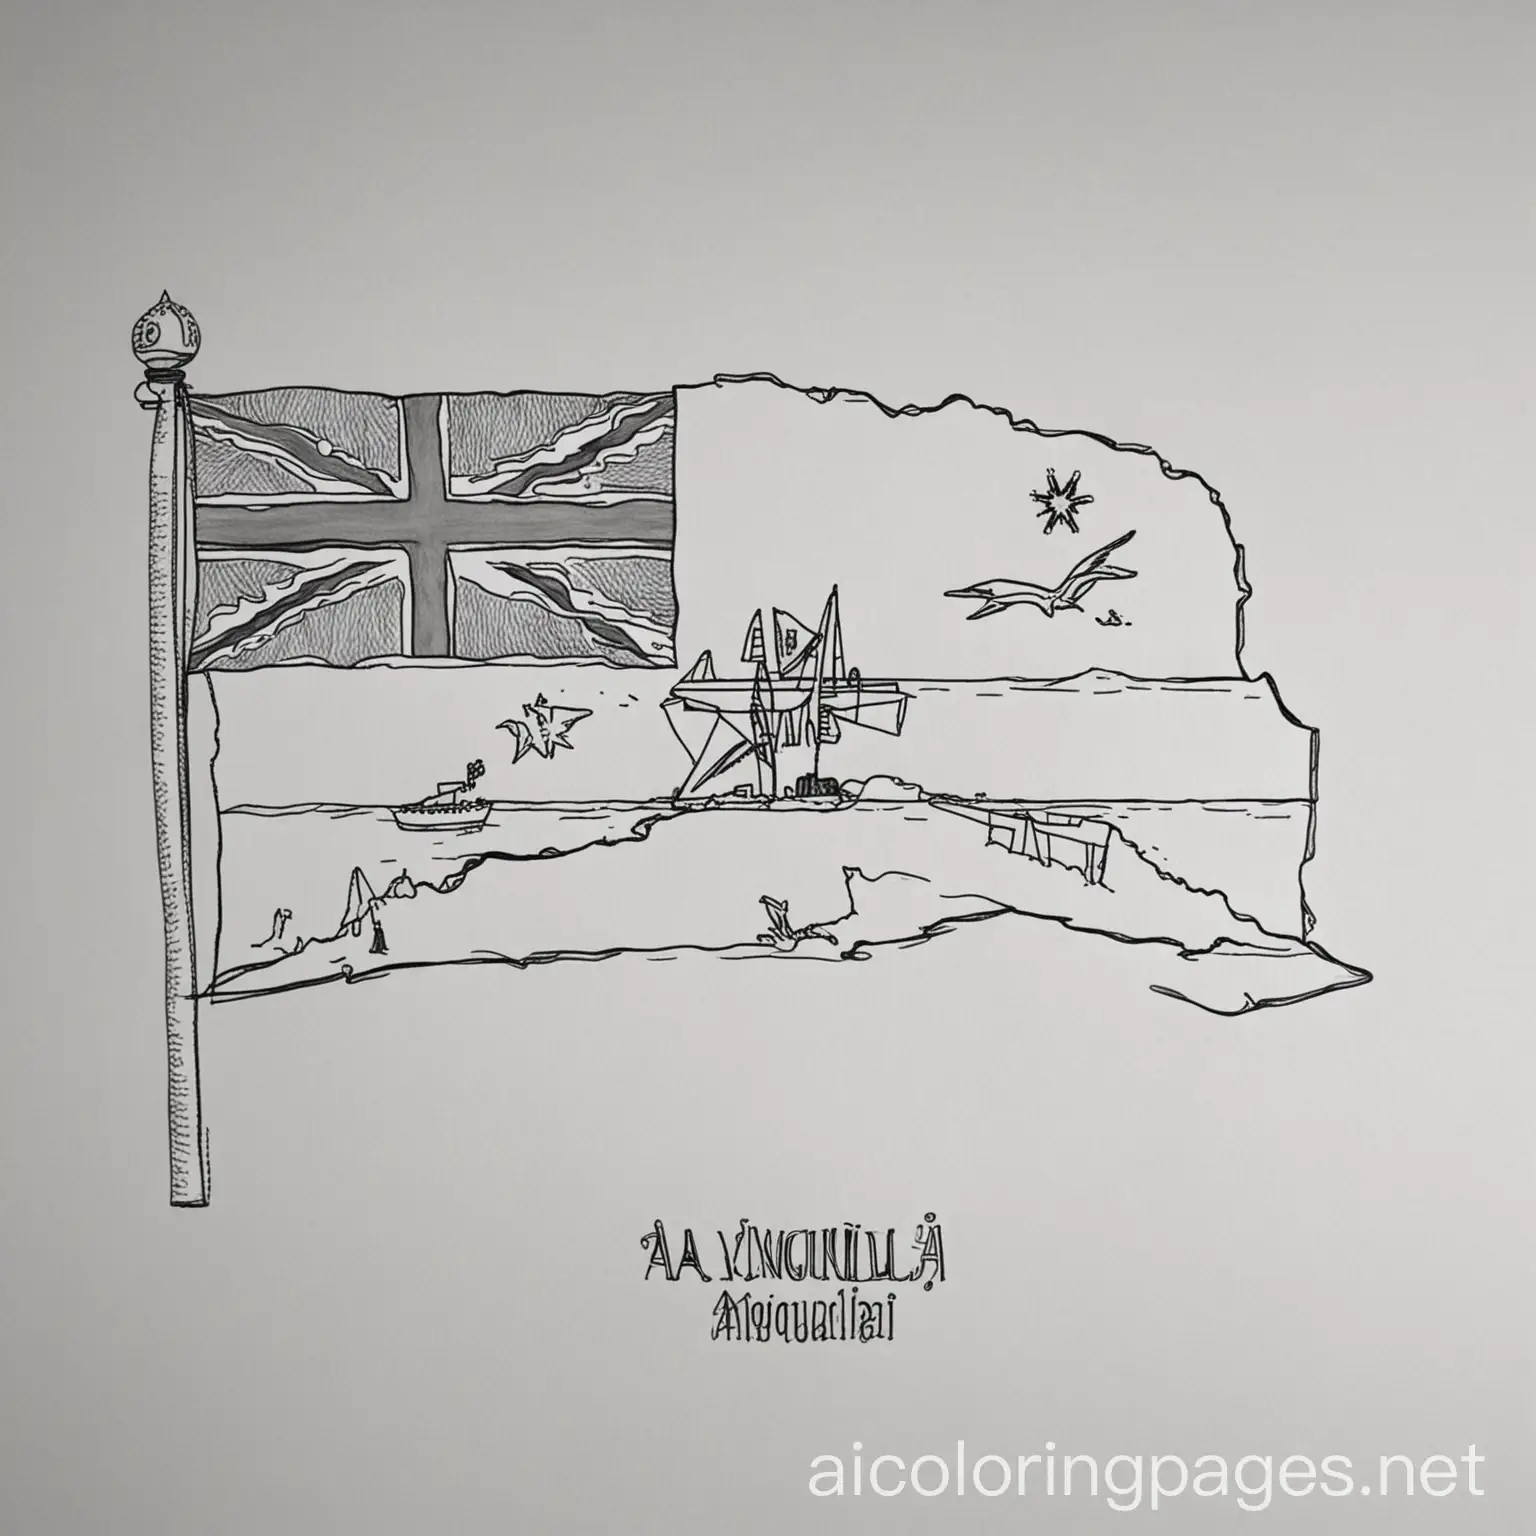 Create a coloring page for Anguilla with the outline of the island, the island's name and the island's flag., Coloring Page, black and white, line art, white background, Simplicity, Ample White Space. The background of the coloring page is plain white to make it easy for young children to color within the lines. The outlines of all the subjects are easy to distinguish, making it simple for kids to color without too much difficulty